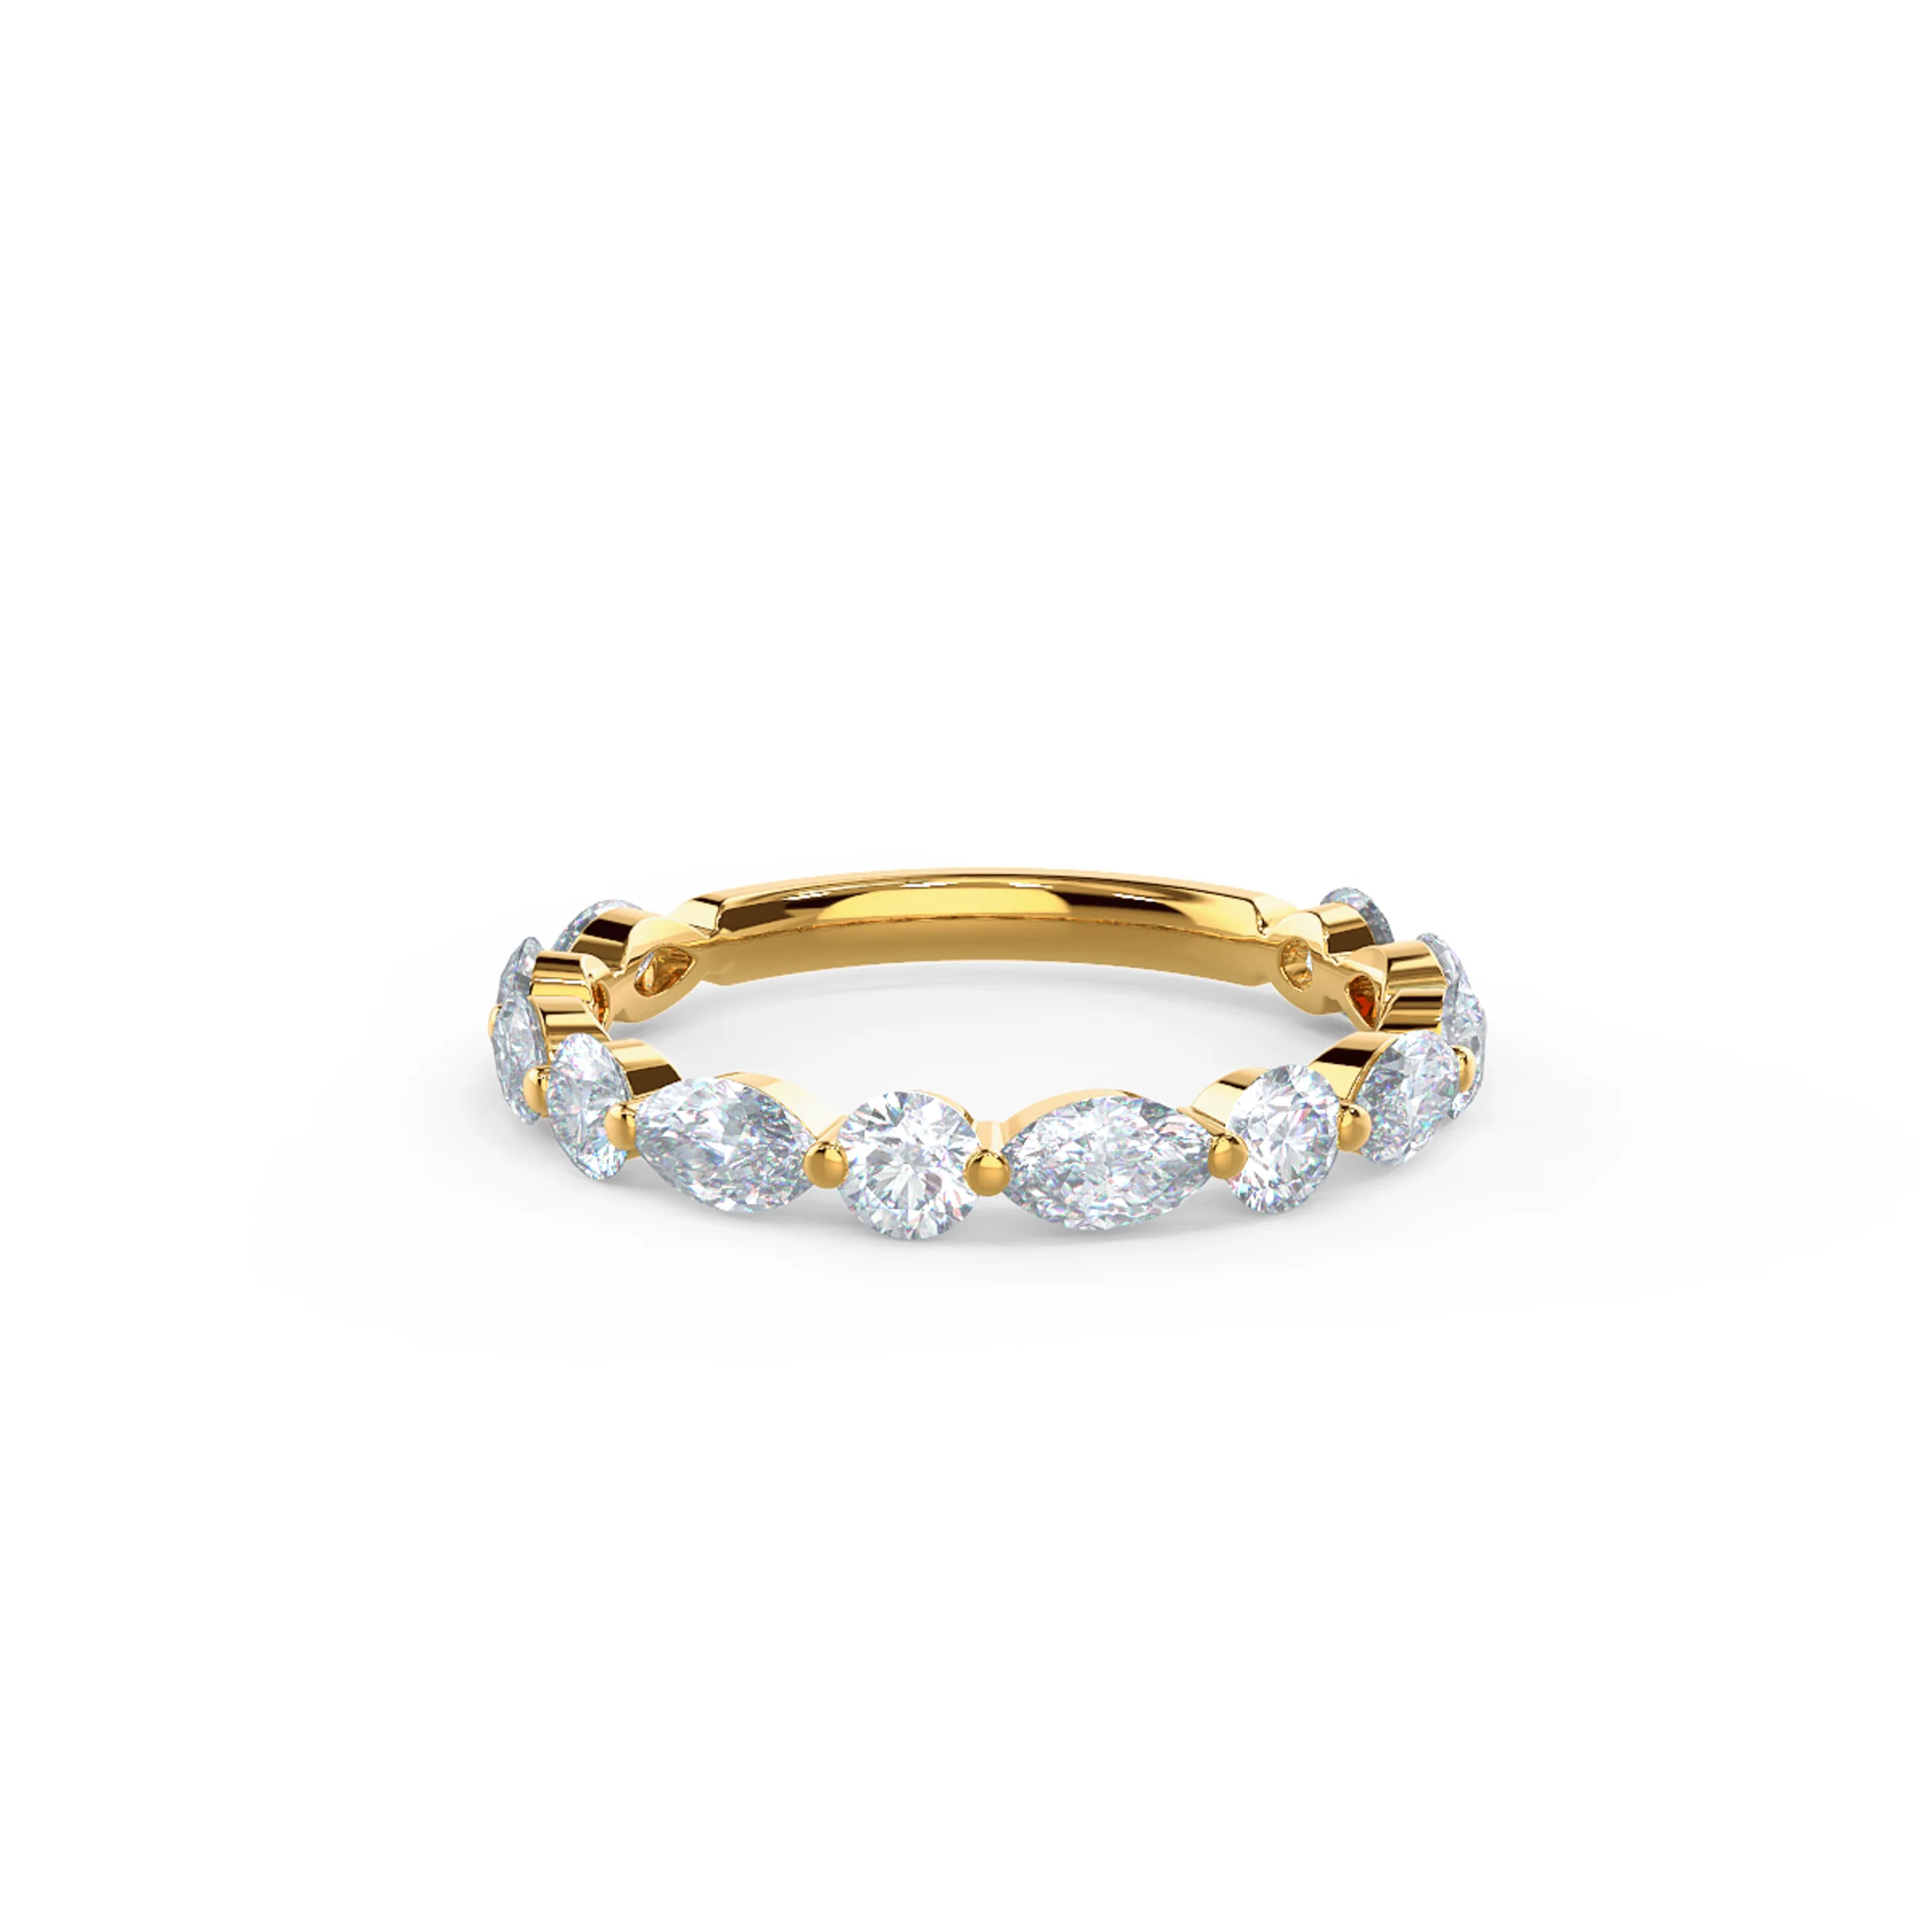 0.9 Carat Diamonds set in 14k Yellow Gold Marquise and Round East-West Three Quarter Band (Main View)